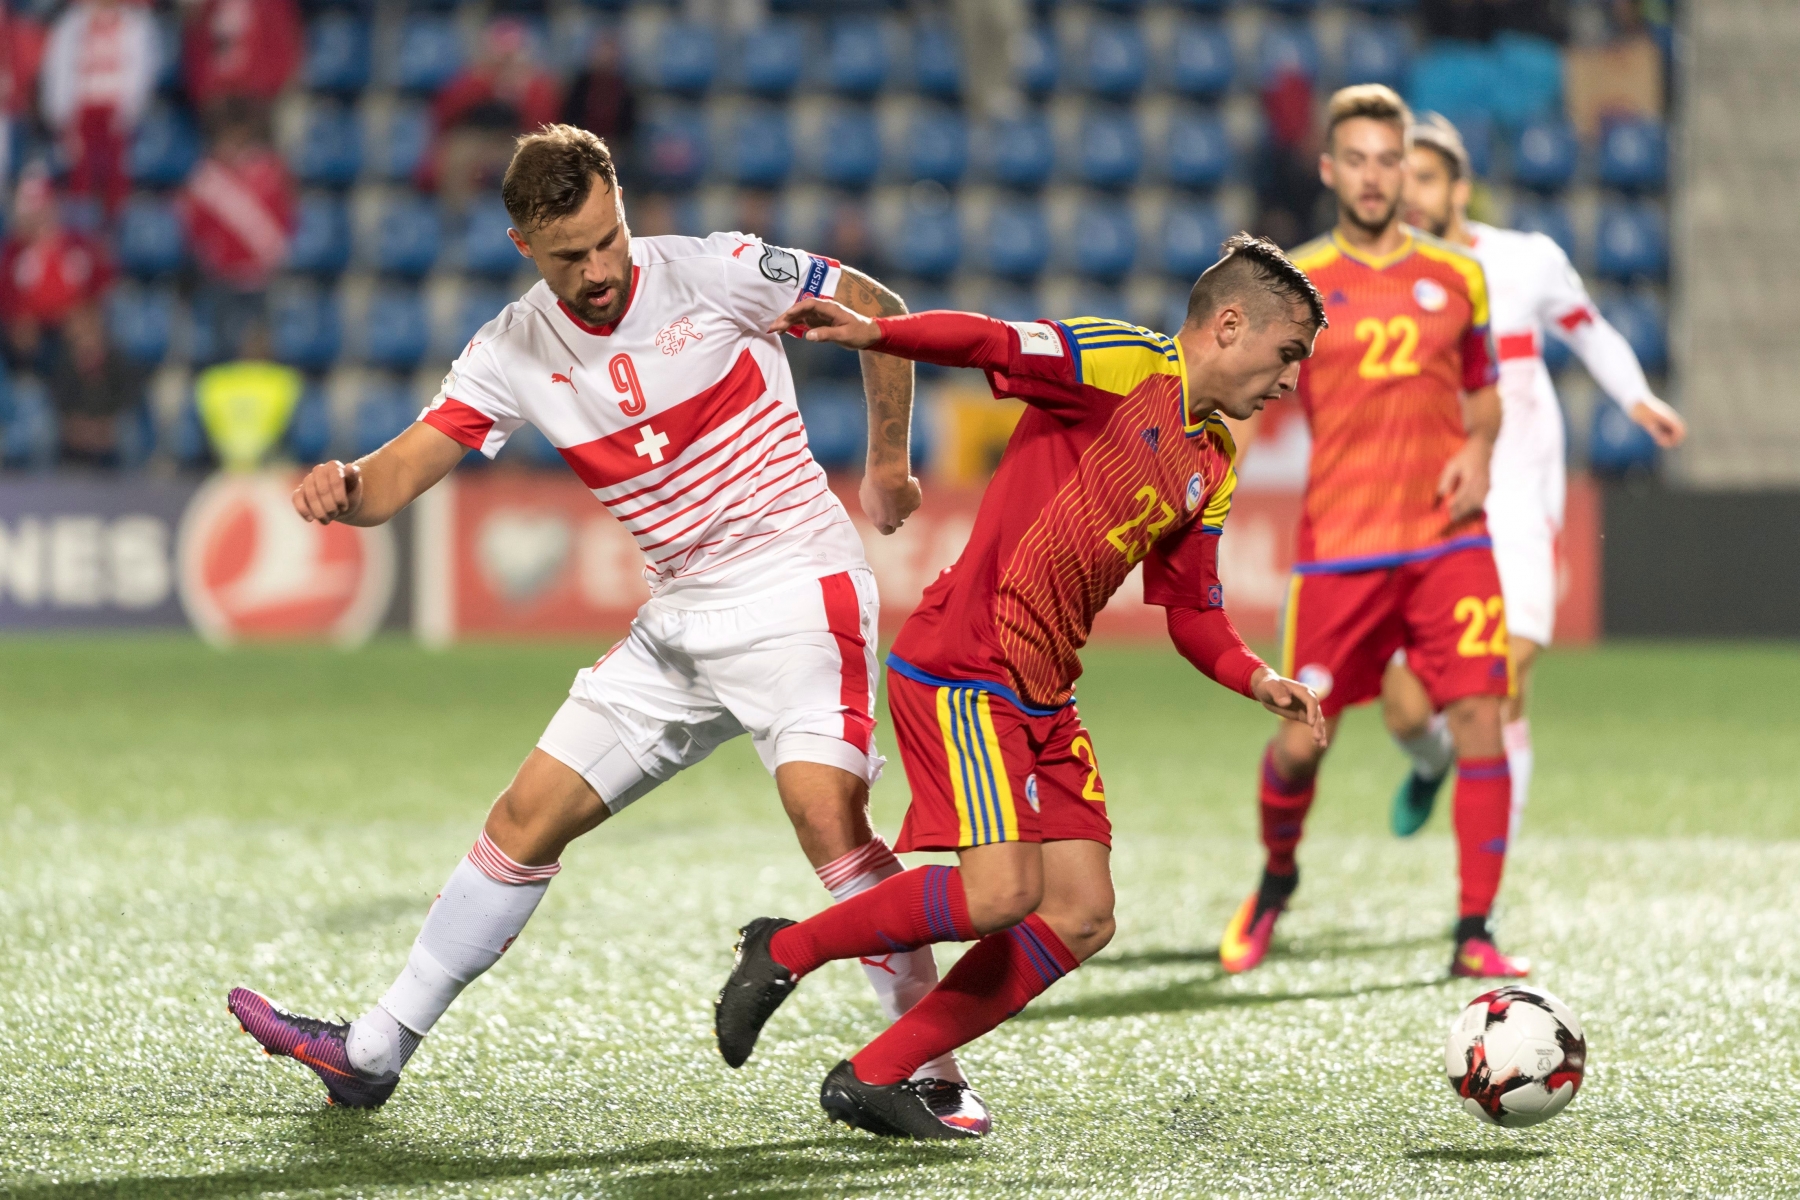 Andorra's Chus Rubio, right, fights for the ball against Switzerland's Haris Seferovic, left, during the 2018 Fifa World Cup Russia group B qualification soccer match between Andorra and Switzerland in the Estadi Nacional in Andorra La Vella, Andorra, on Monday, October 10, 2016. (KEYSTONE/Georgios Kefalas) ANDORRA FIFA WORLD CUP QUALIFICATION ANDORRA SWITZERLAND